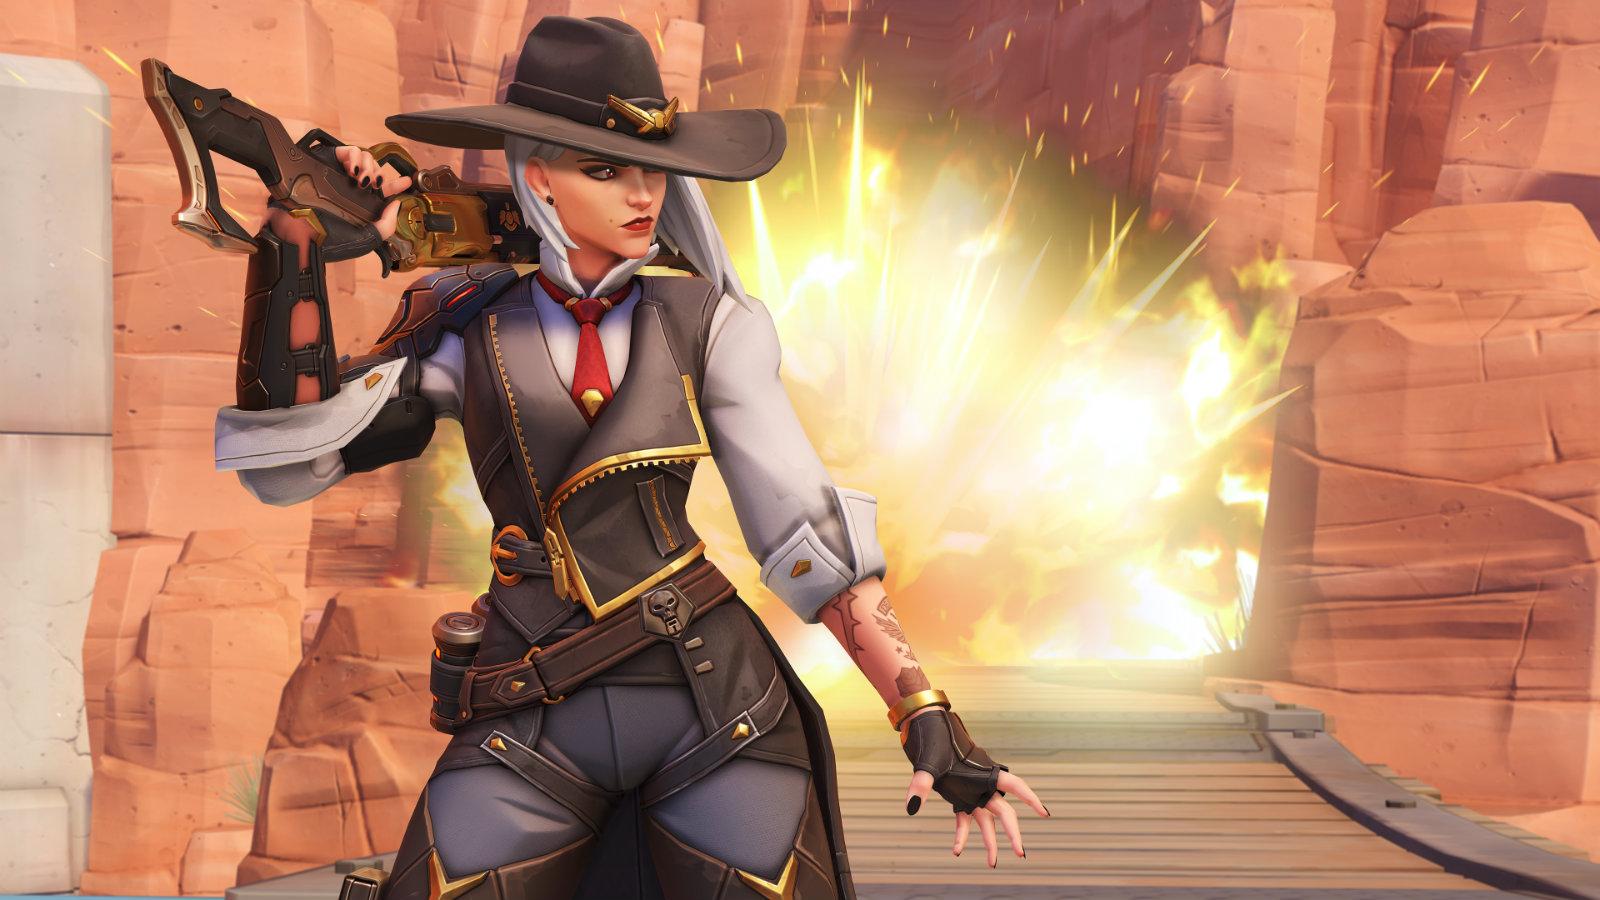 Ashe Overwatch 2 still with explosion in background